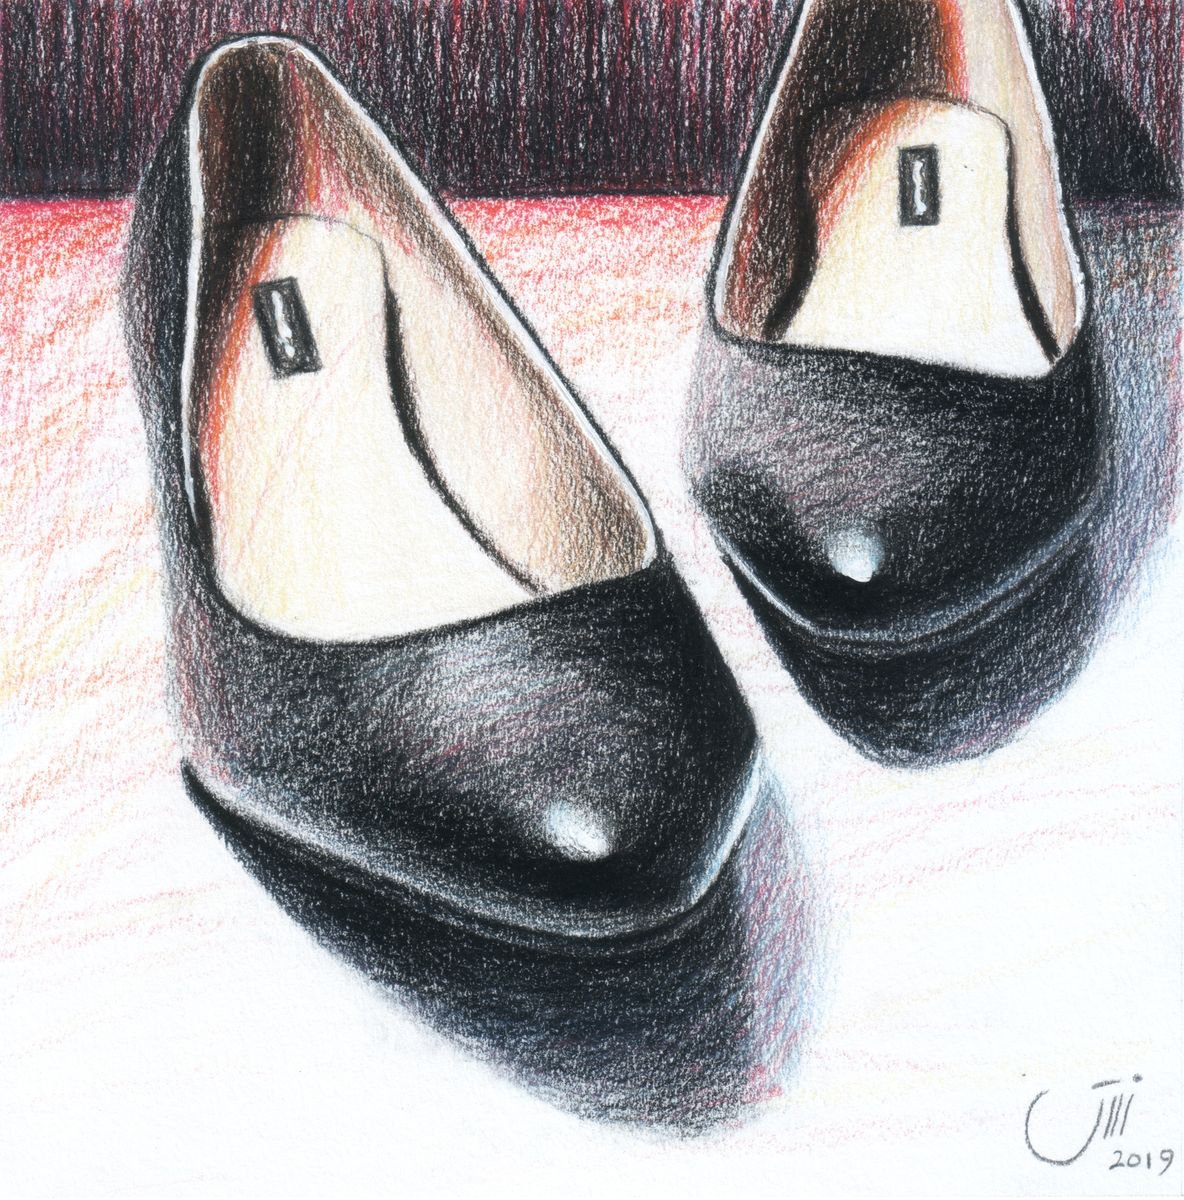 NO.158, New Shoes by sedigheh zoghi